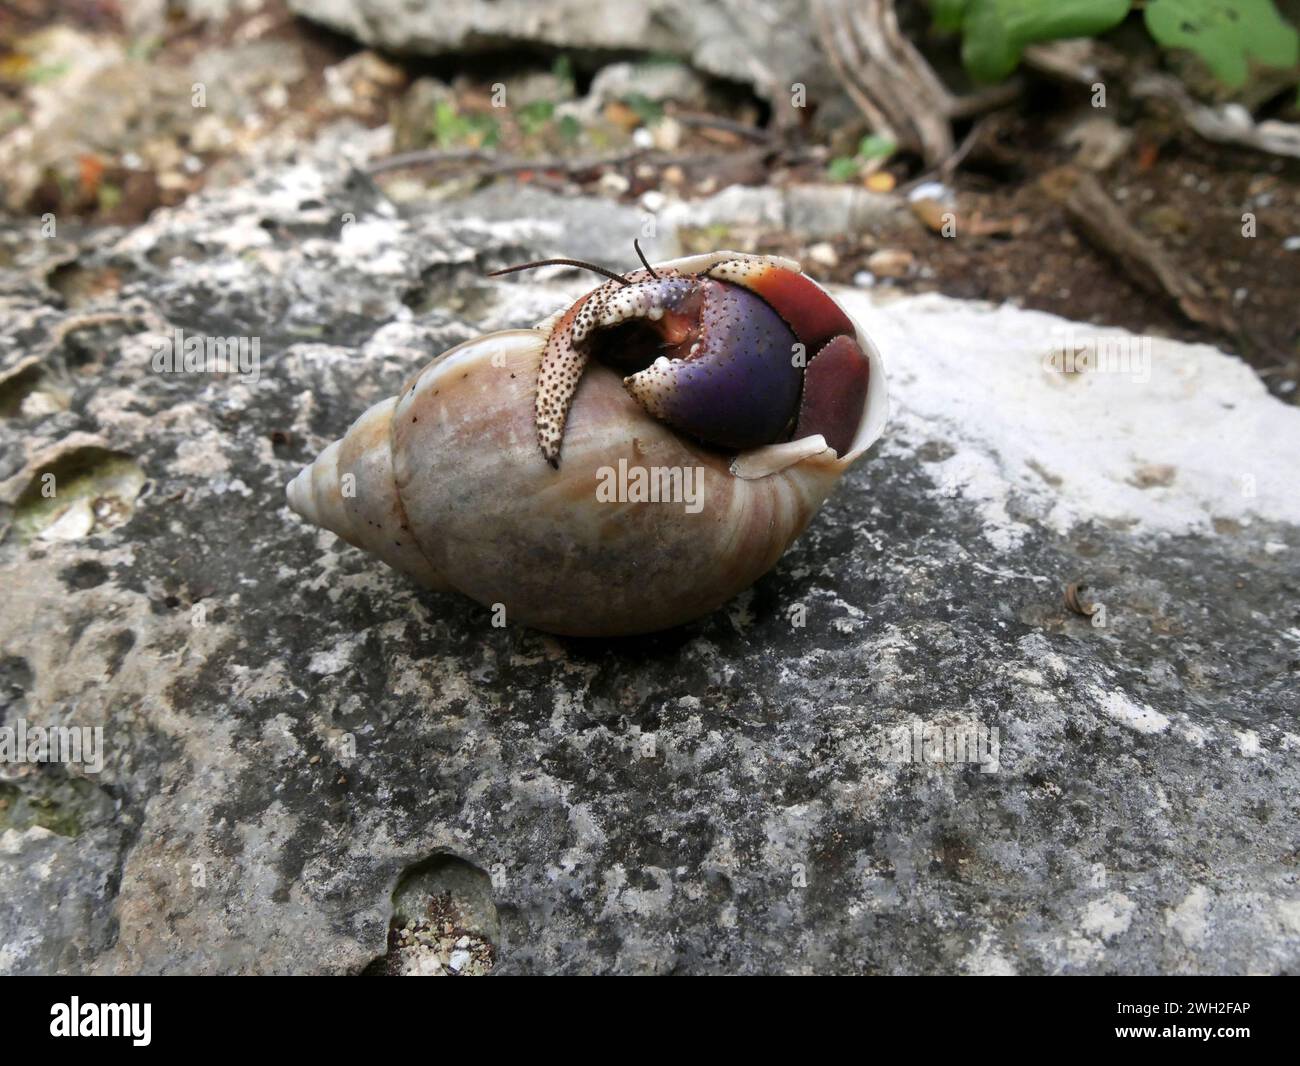 Caribbean hermit crab on a rock, guadeloupe Stock Photo